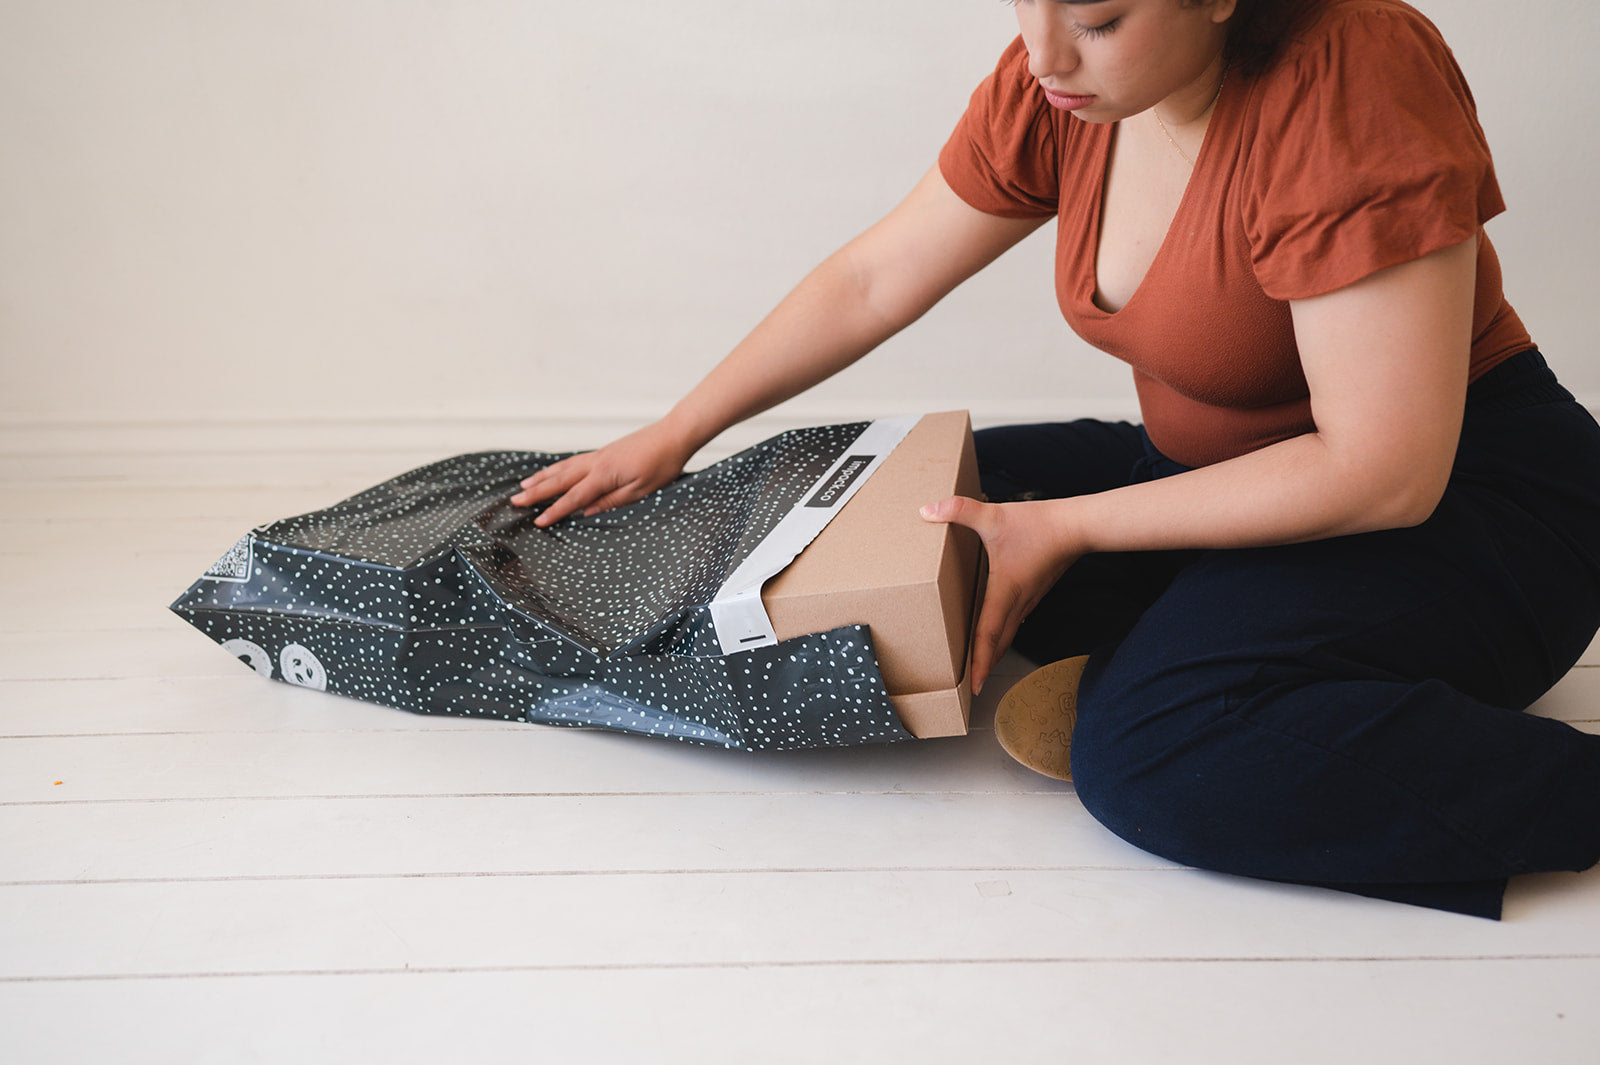 A woman is opening a Wavy Dots Biodegradable Mailers 19" x 24" box from impack.co on the floor.